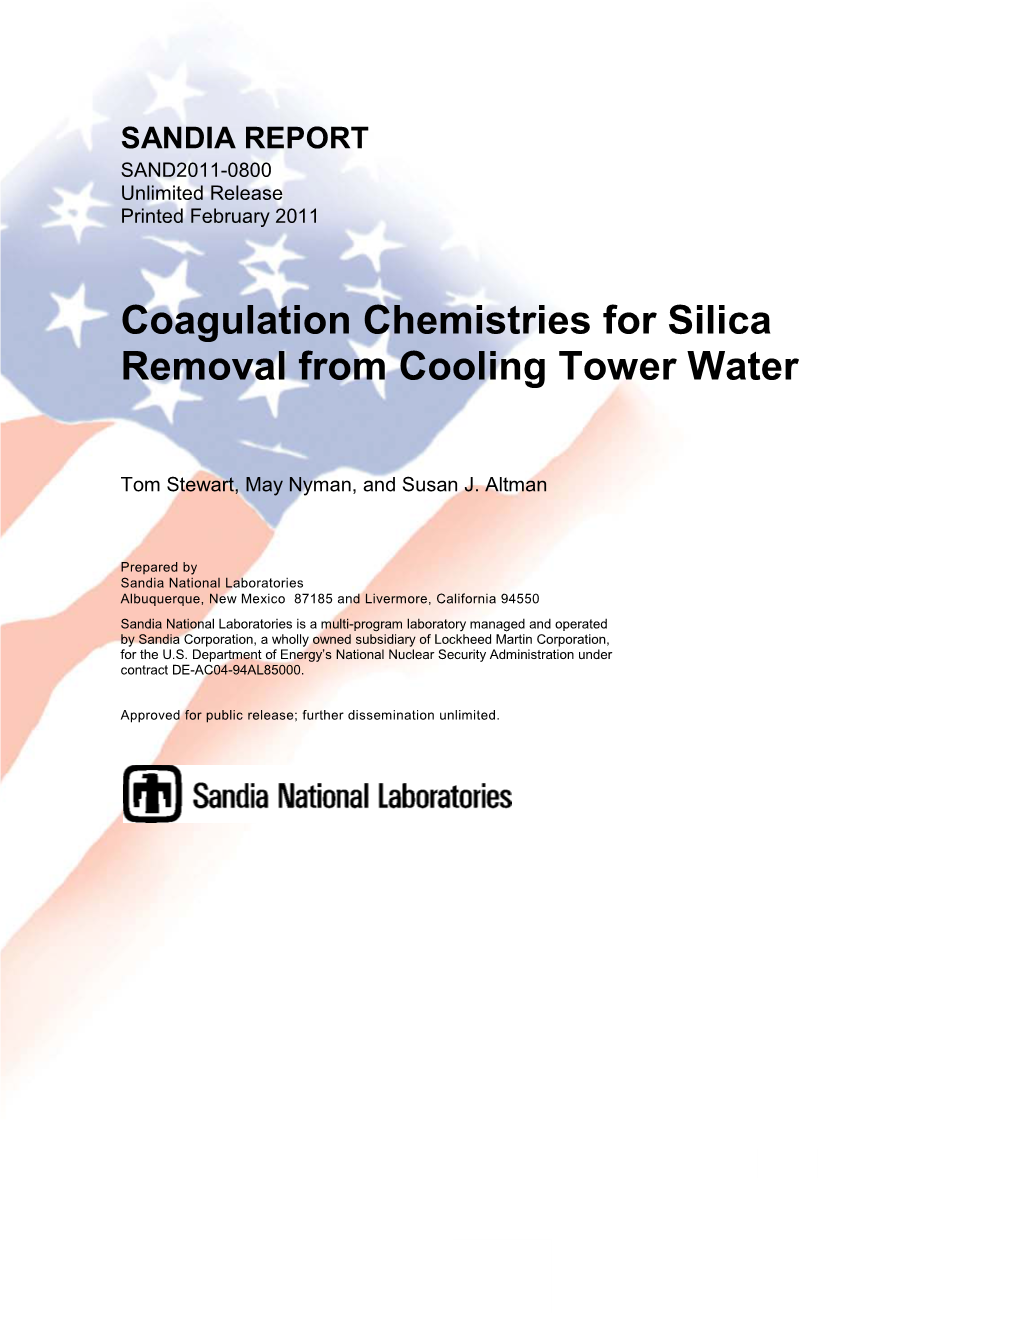 Coagulation Chemistries for Silica Removal from Cooling Tower Water